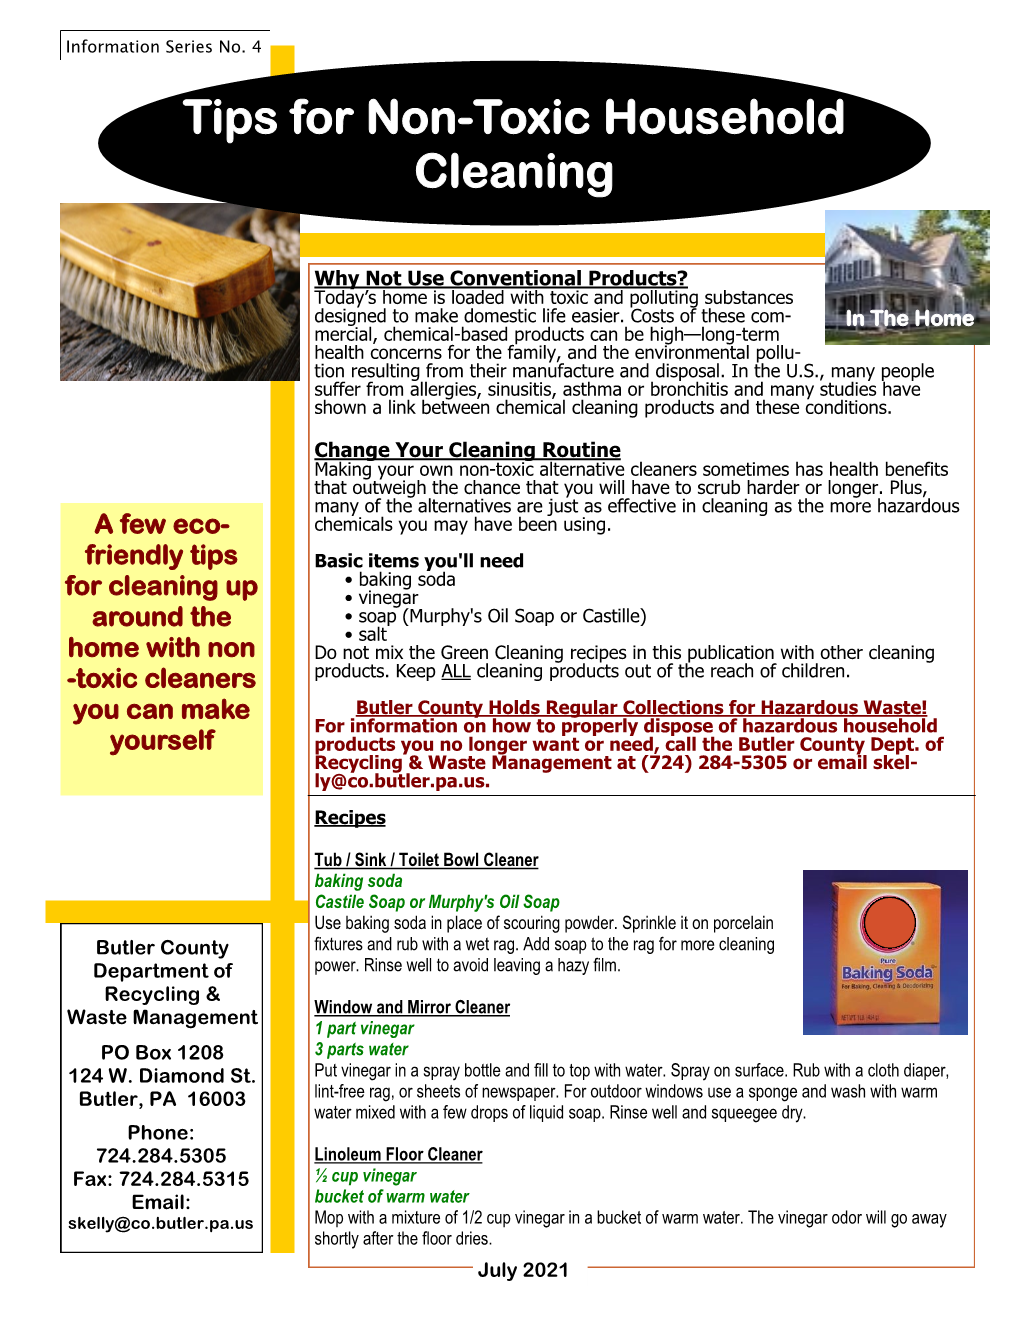 Tips for Non-Toxic Household Cleaning